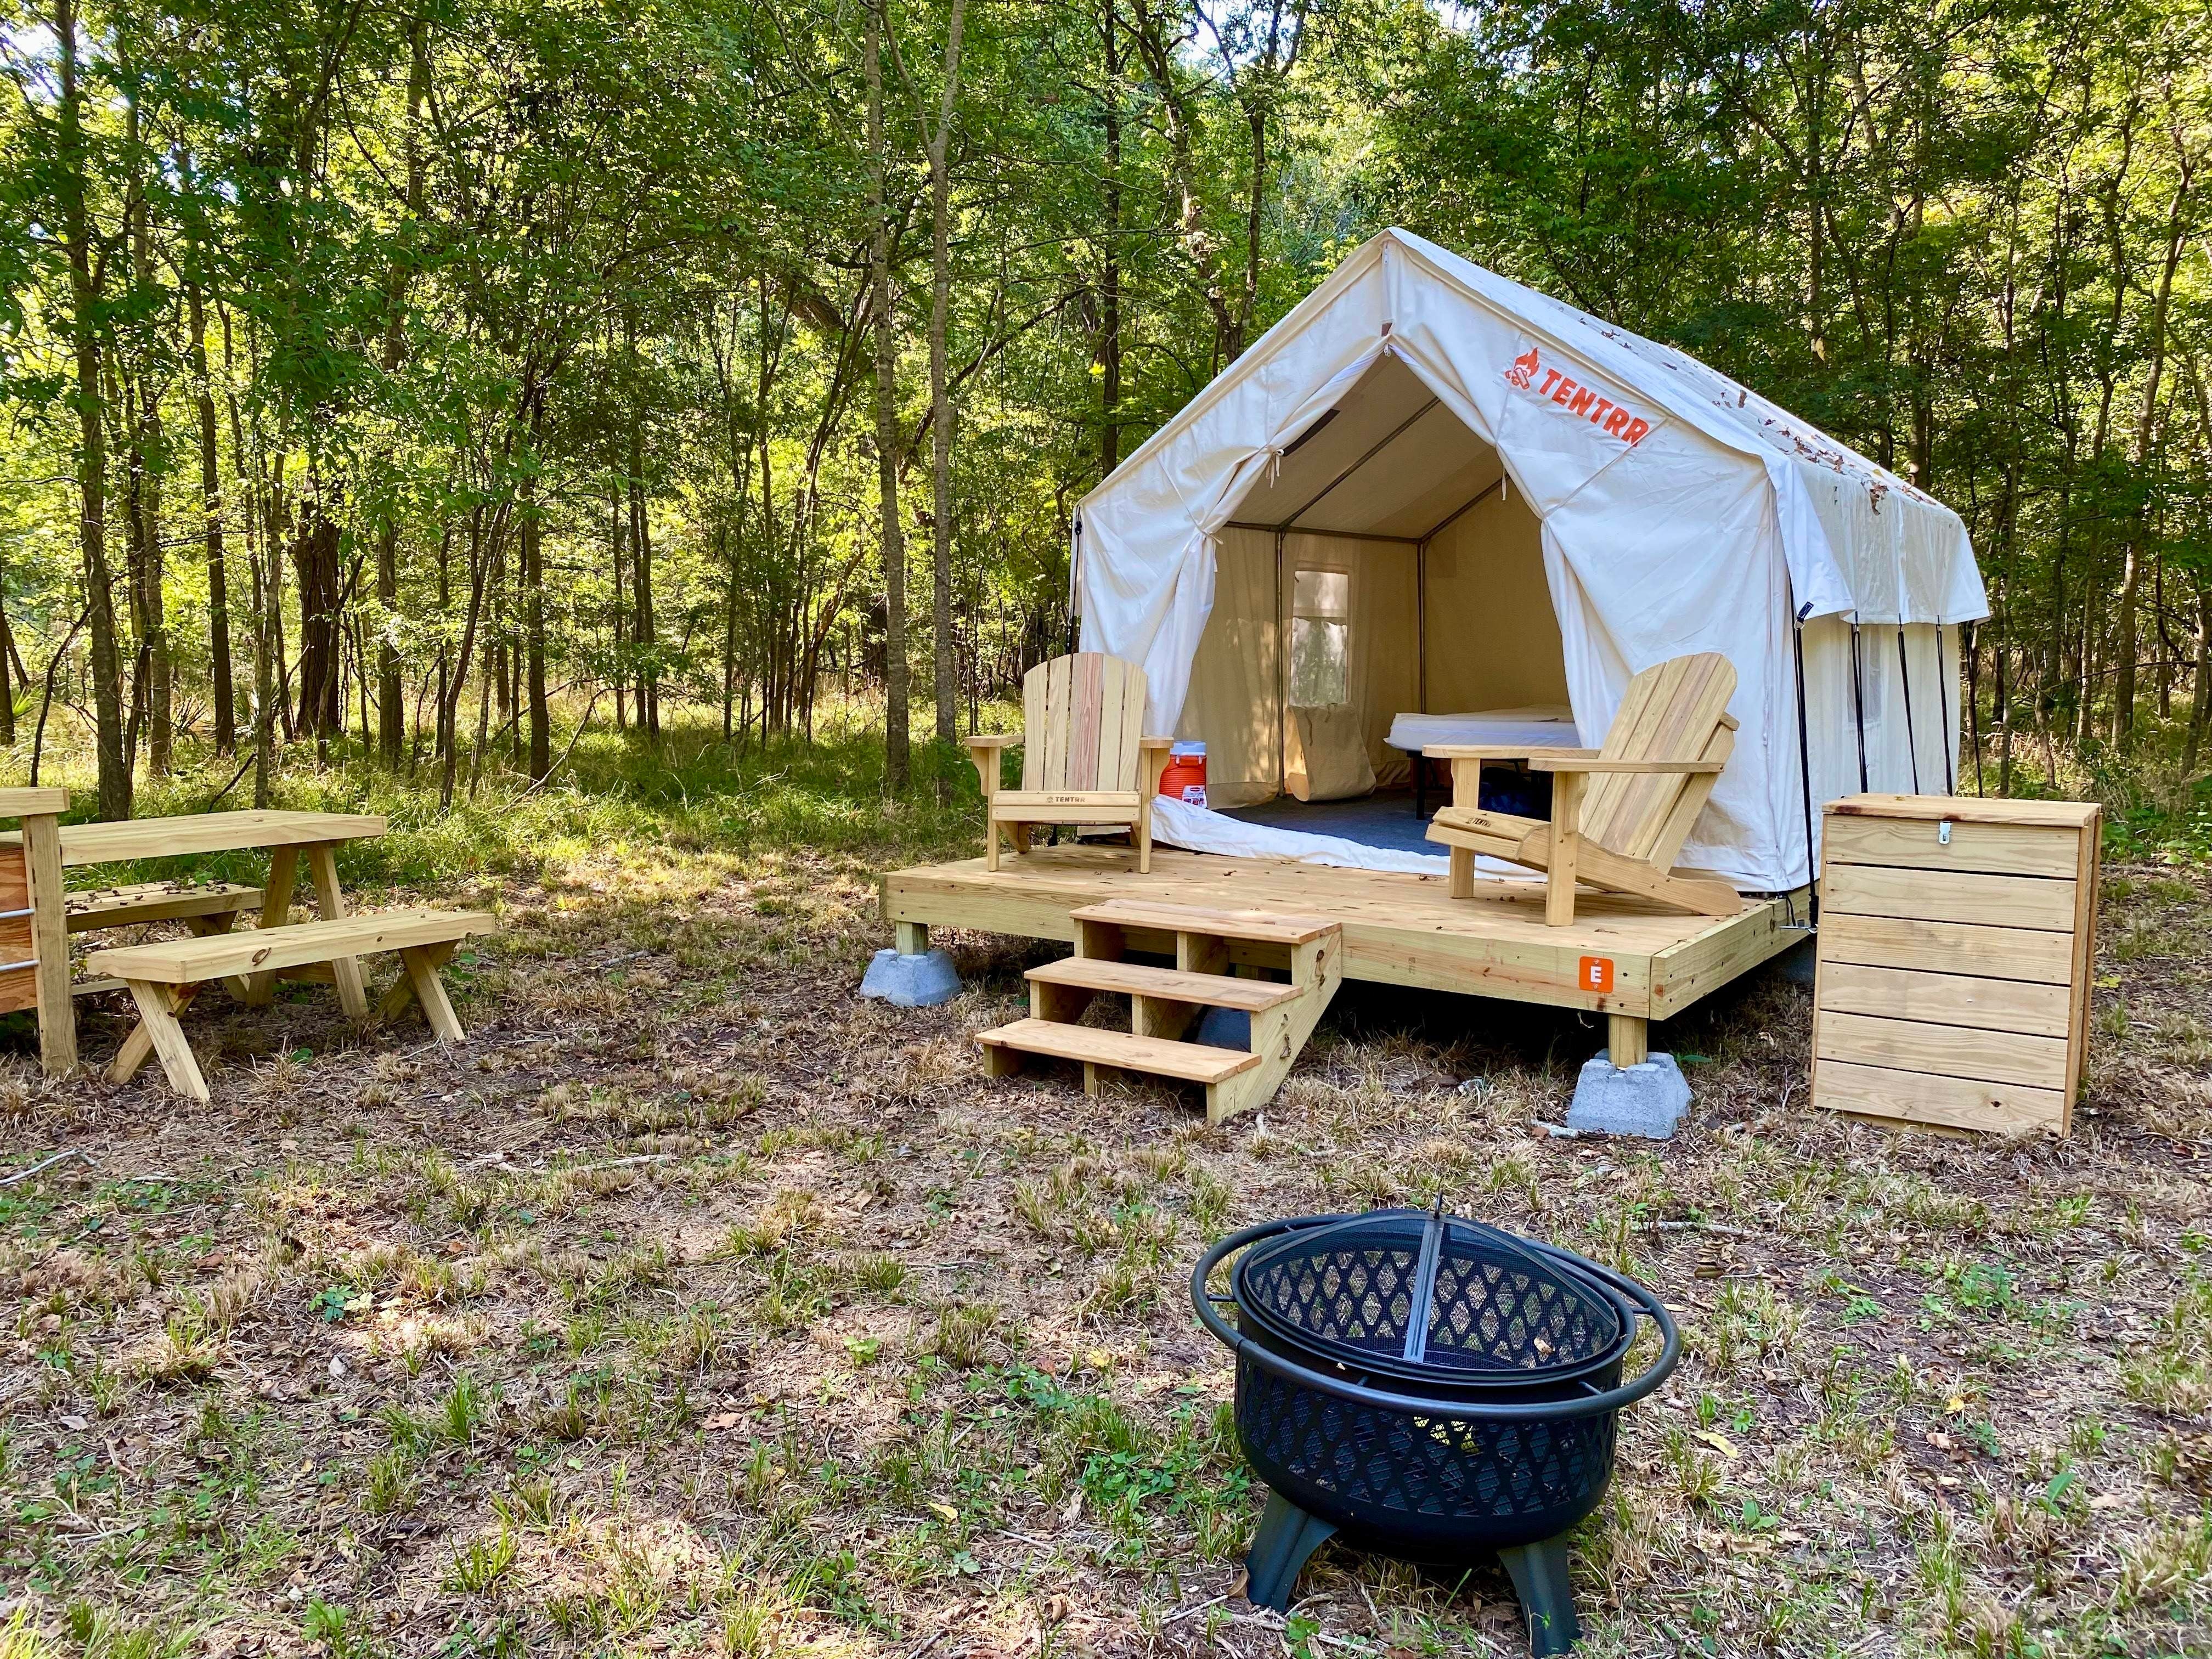 Camper submitted image from Tentrr State Park Site - Texas Brazos Bend State Park ___ Trailside E ___ Single Camp - 2